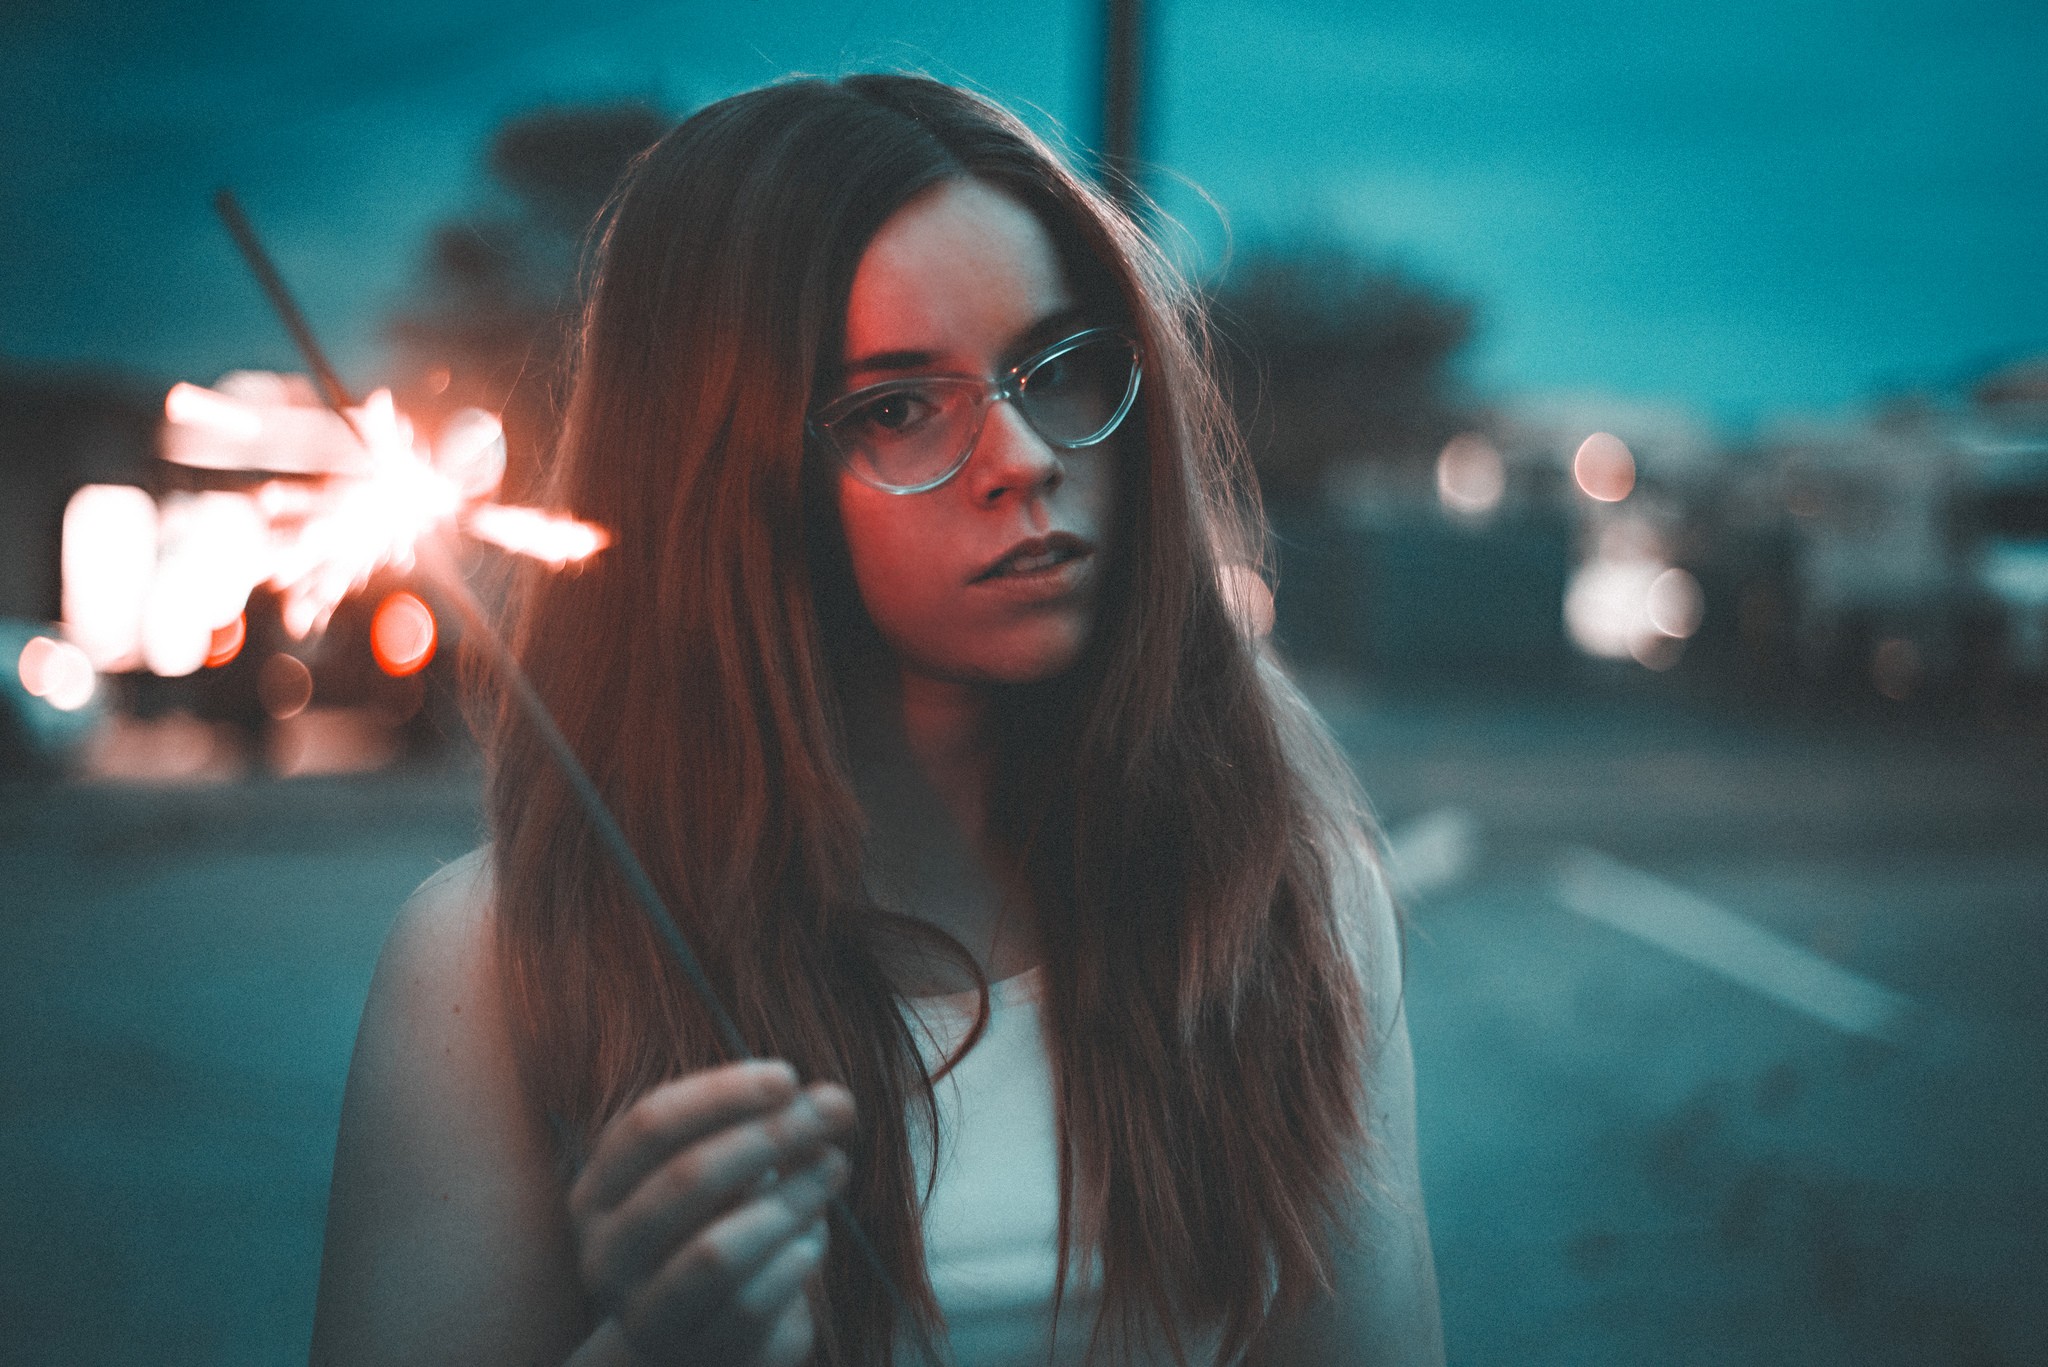 Women Brunette Women With Glasses Looking At Viewer Sparkler Glasses Urban Women Outdoors Long